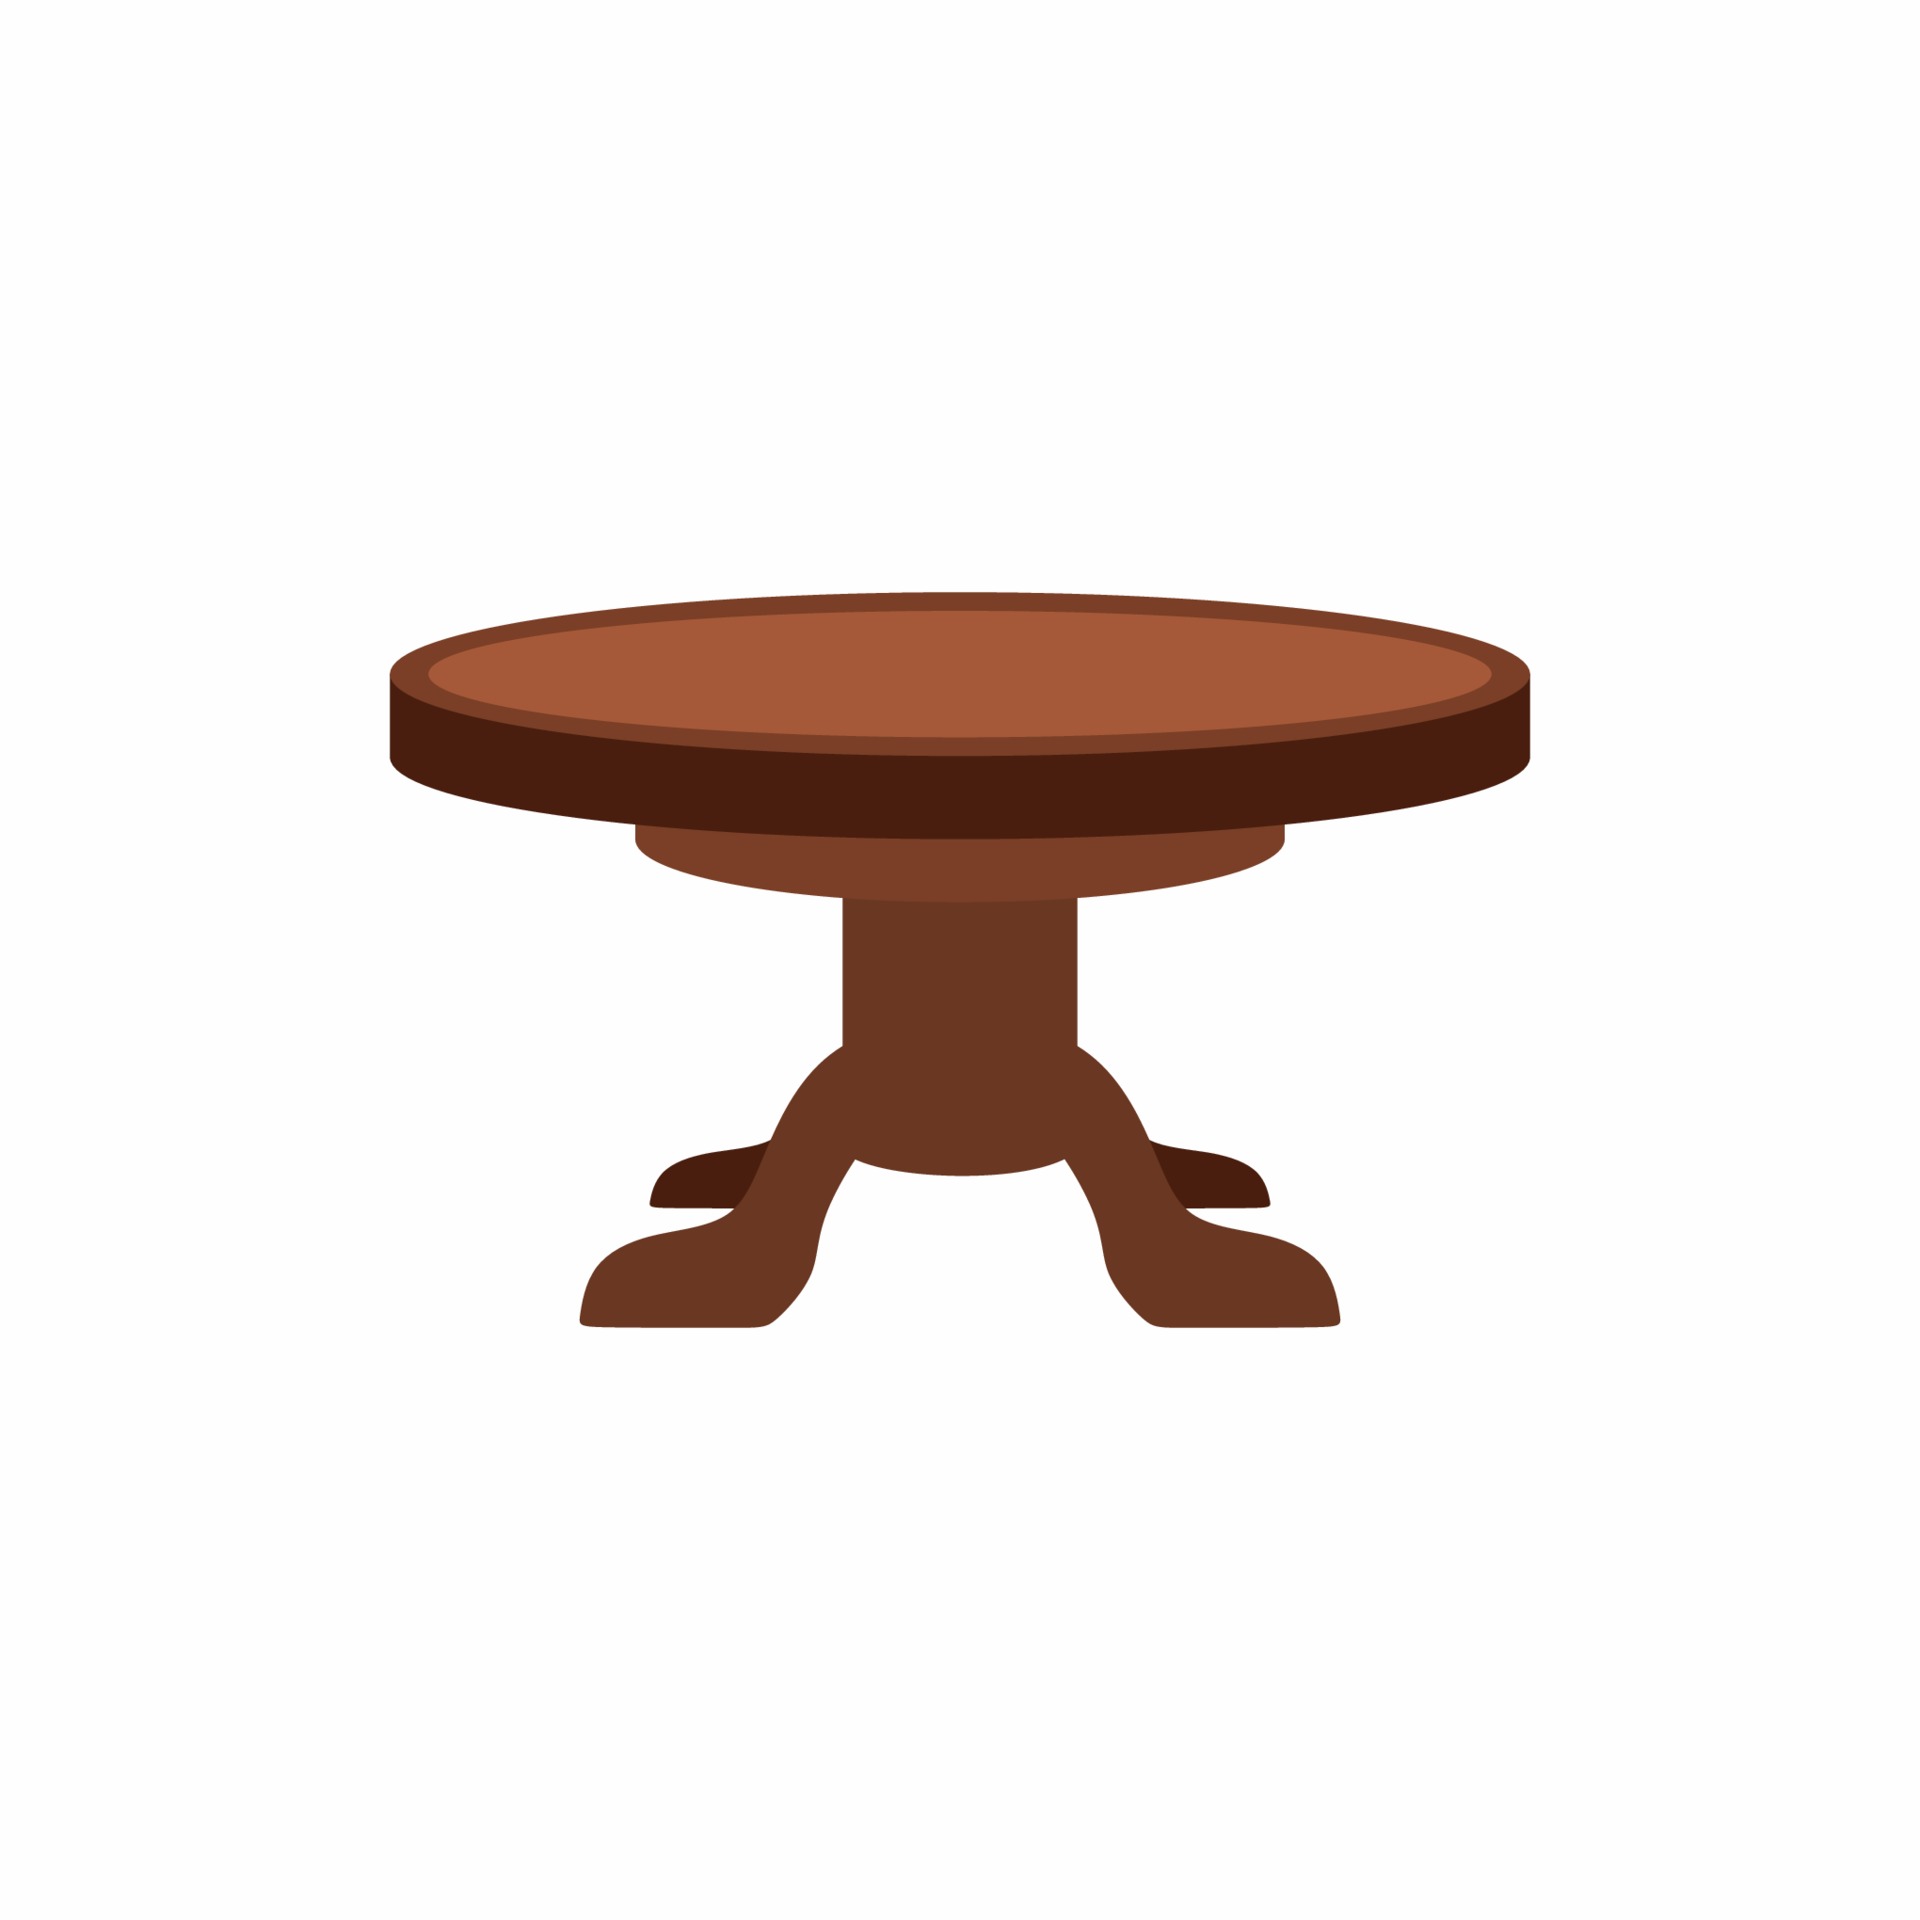 Round table or stool flat cartoon style. Furniture design element for  living room interior. Wooden furniture, household item, interior, coziness.  Vector illustration isolated on white background. 2099026 Vector Art at  Vecteezy